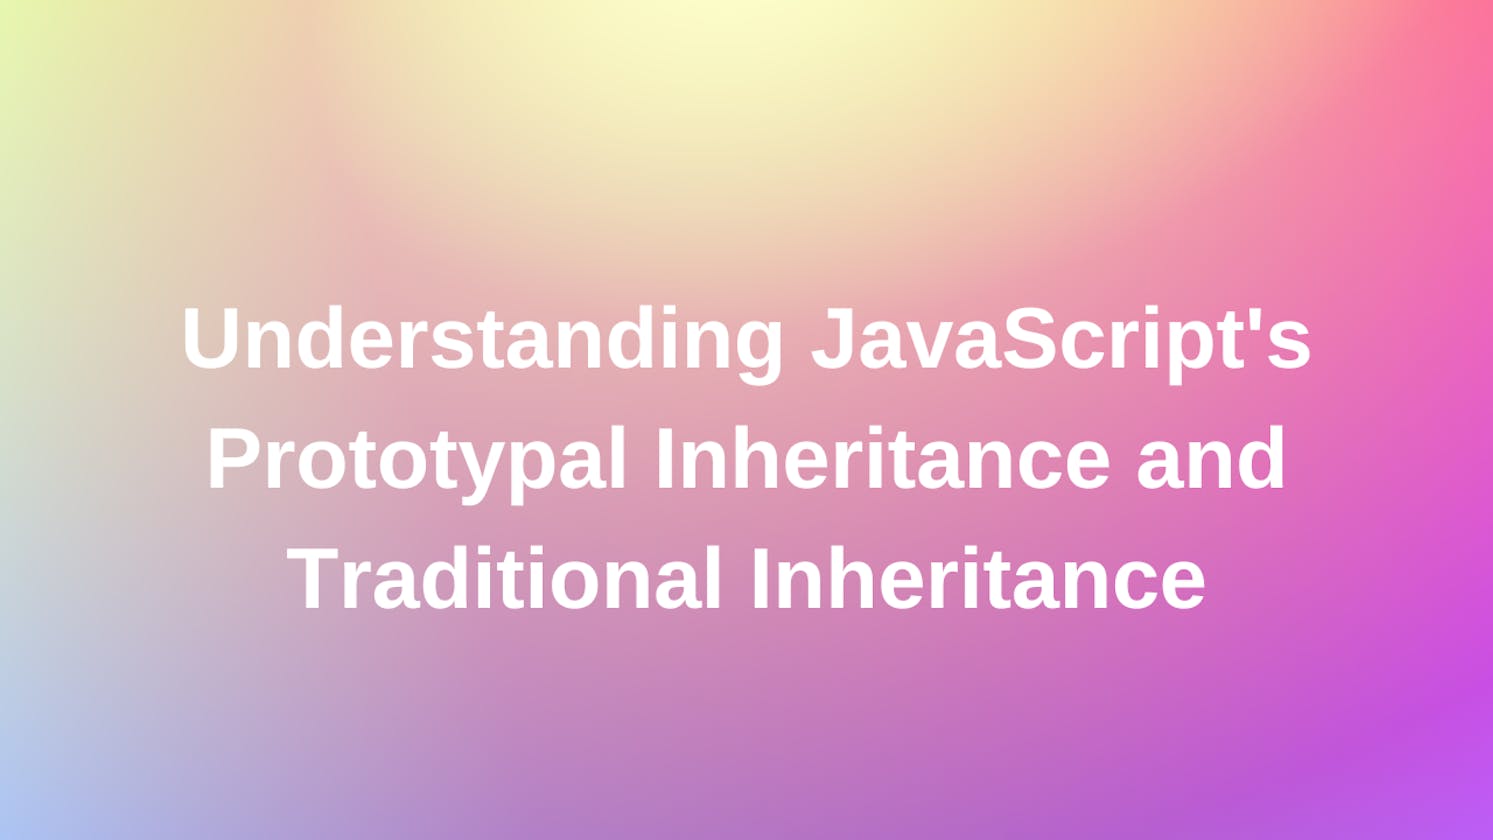 Difference between JavaScript's Prototypal Inheritance and Traditional Inheritance